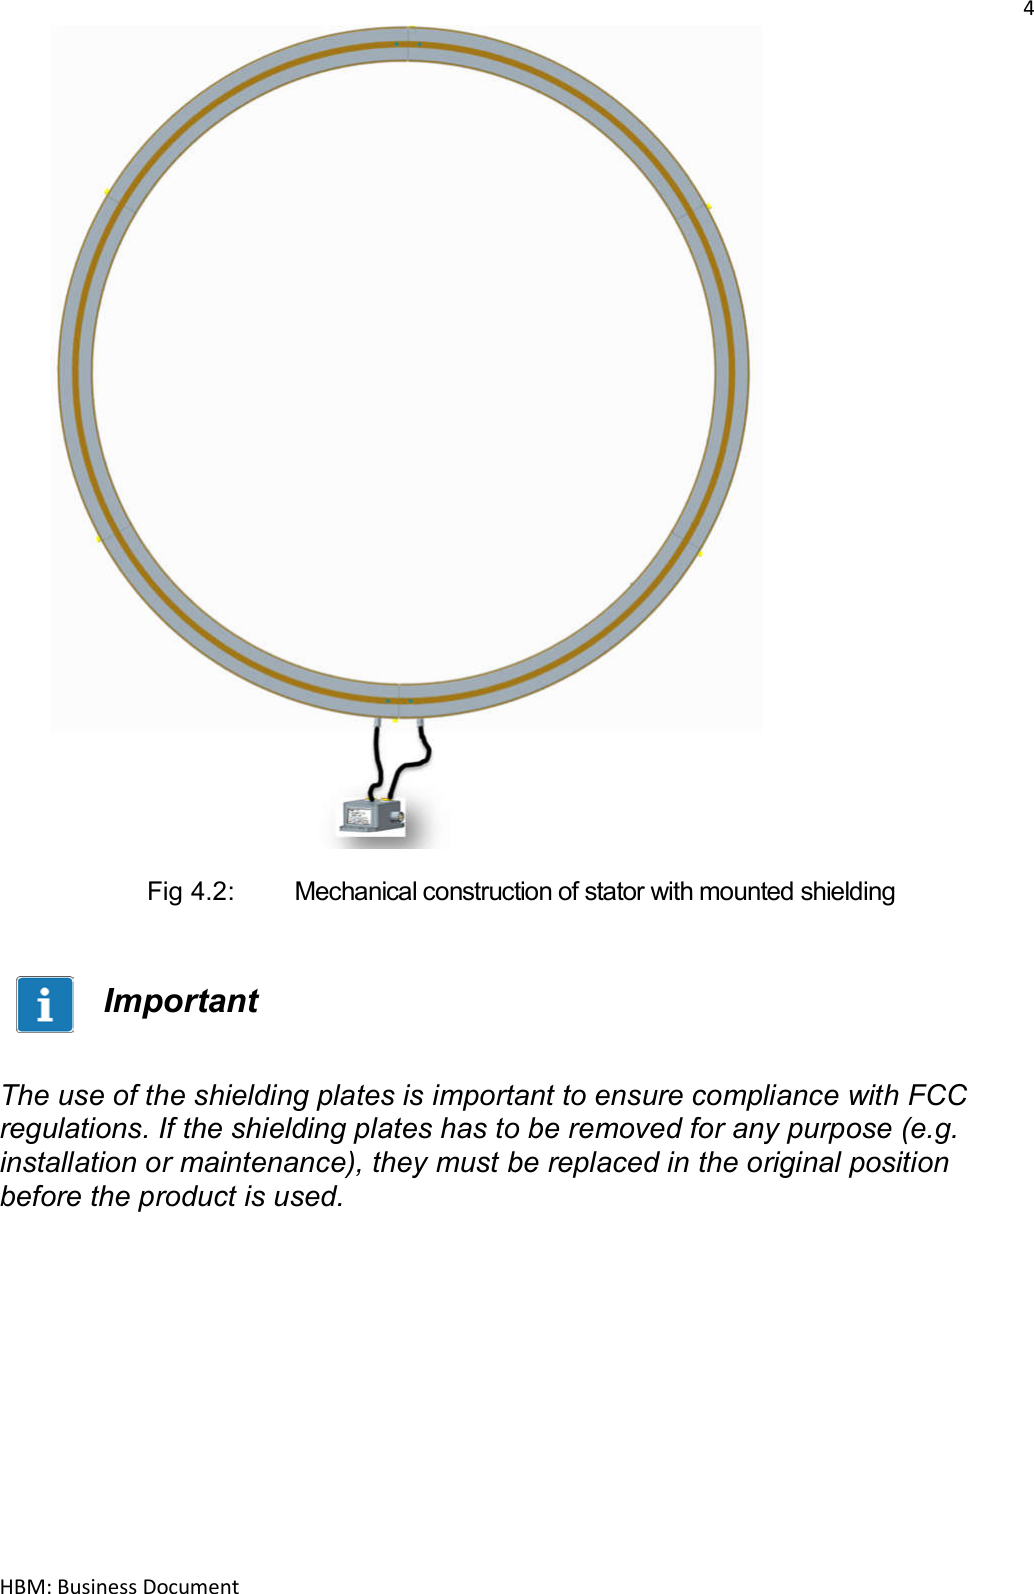 4  HBM: Business Document                         Fig 4.2:   Mechanical construction of stator with mounted shielding   Important   The use of the shielding plates is important to ensure compliance with FCC regulations. If the shielding plates has to be removed for any purpose (e.g. installation or maintenance), they must be replaced in the original position before the product is used.    